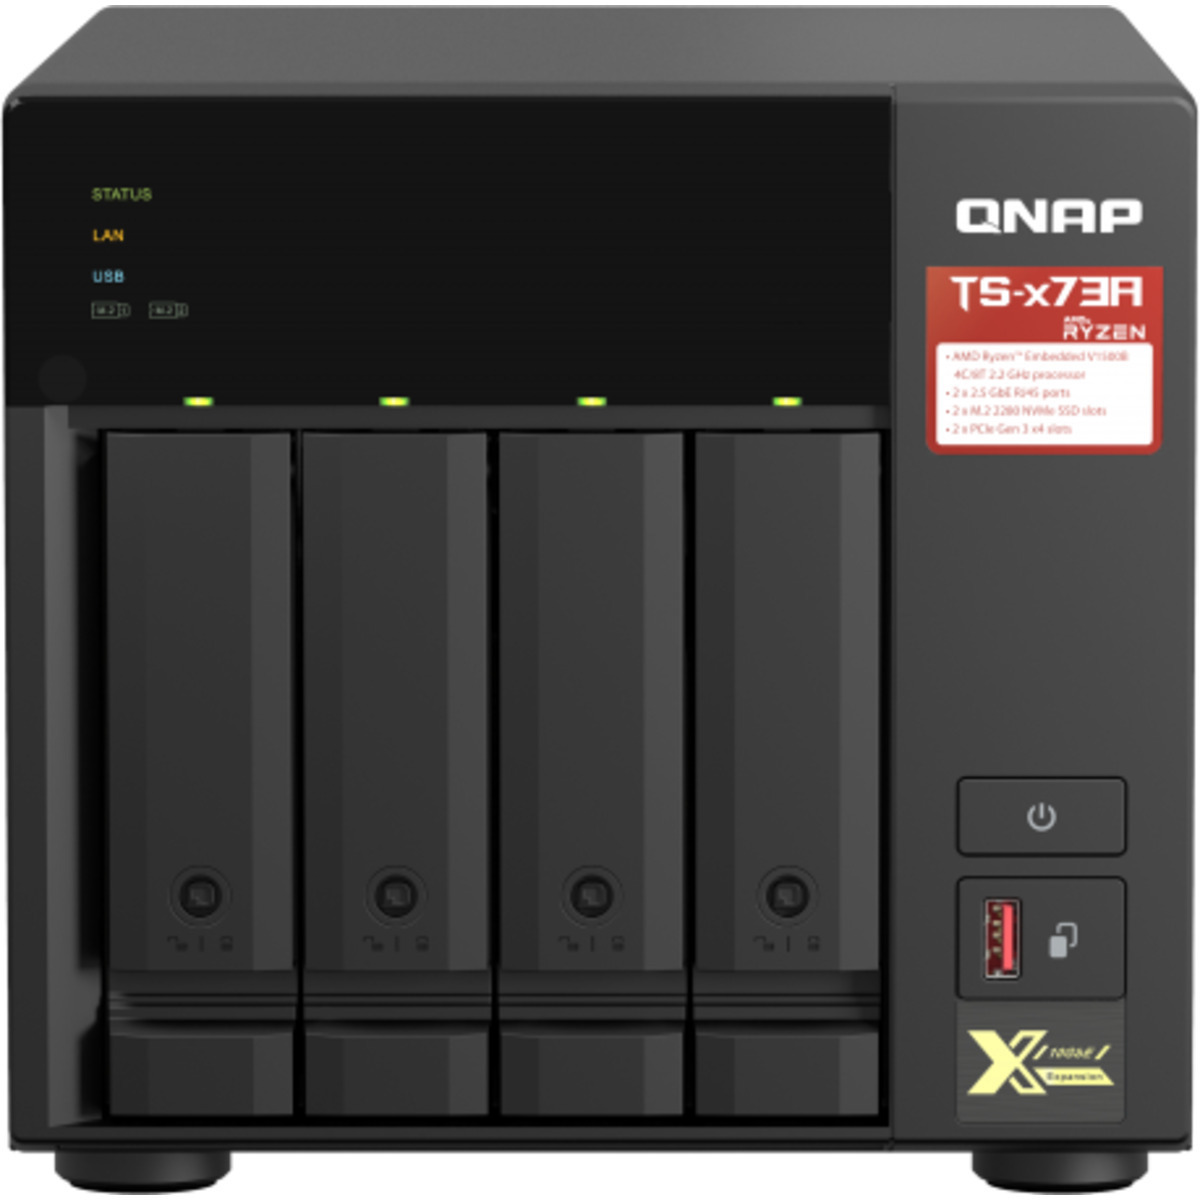 QNAP TS-473A 24tb 4-Bay Desktop Multimedia / Power User / Business NAS - Network Attached Storage Device 4x6tb Seagate BarraCuda ST6000DM003 3.5 5400rpm SATA 6Gb/s HDD CONSUMER Class Drives Installed - Burn-In Tested TS-473A